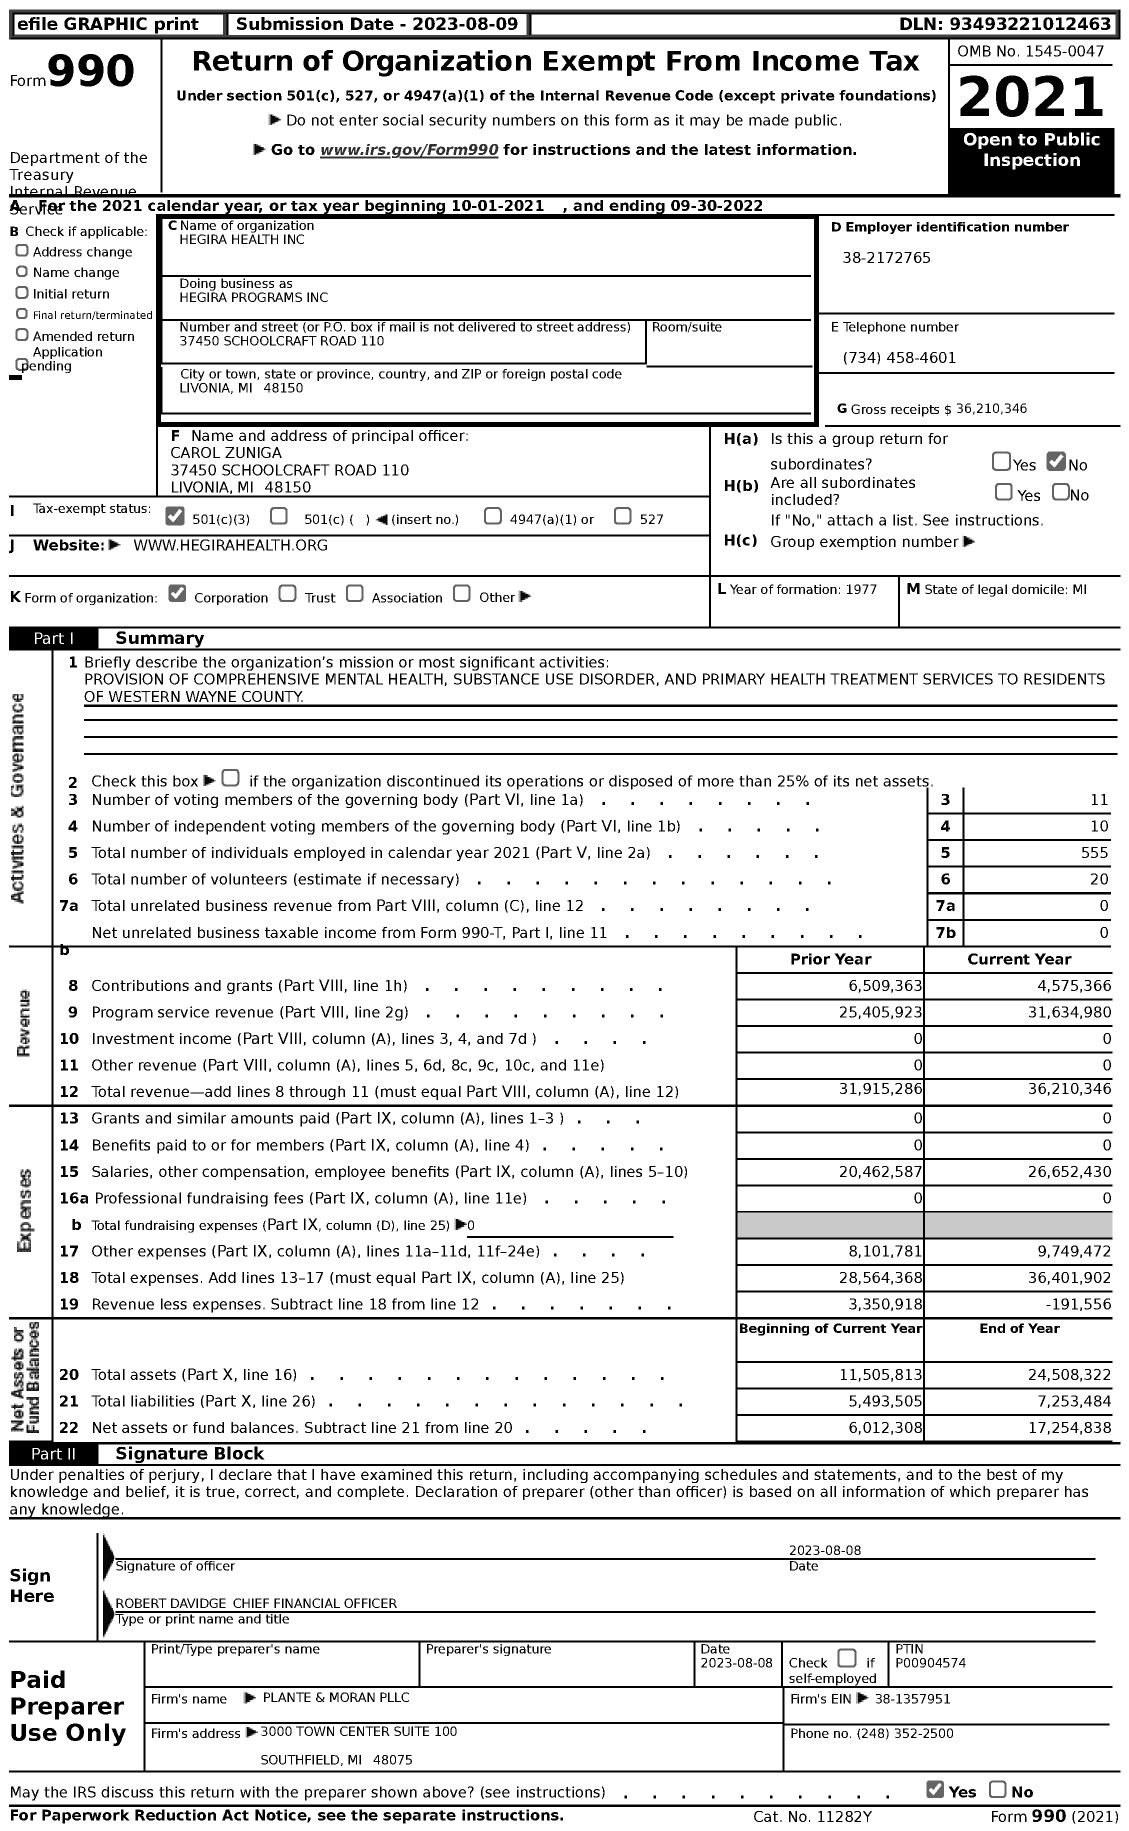 Image of first page of 2021 Form 990 for Hegira Programs (HPI)